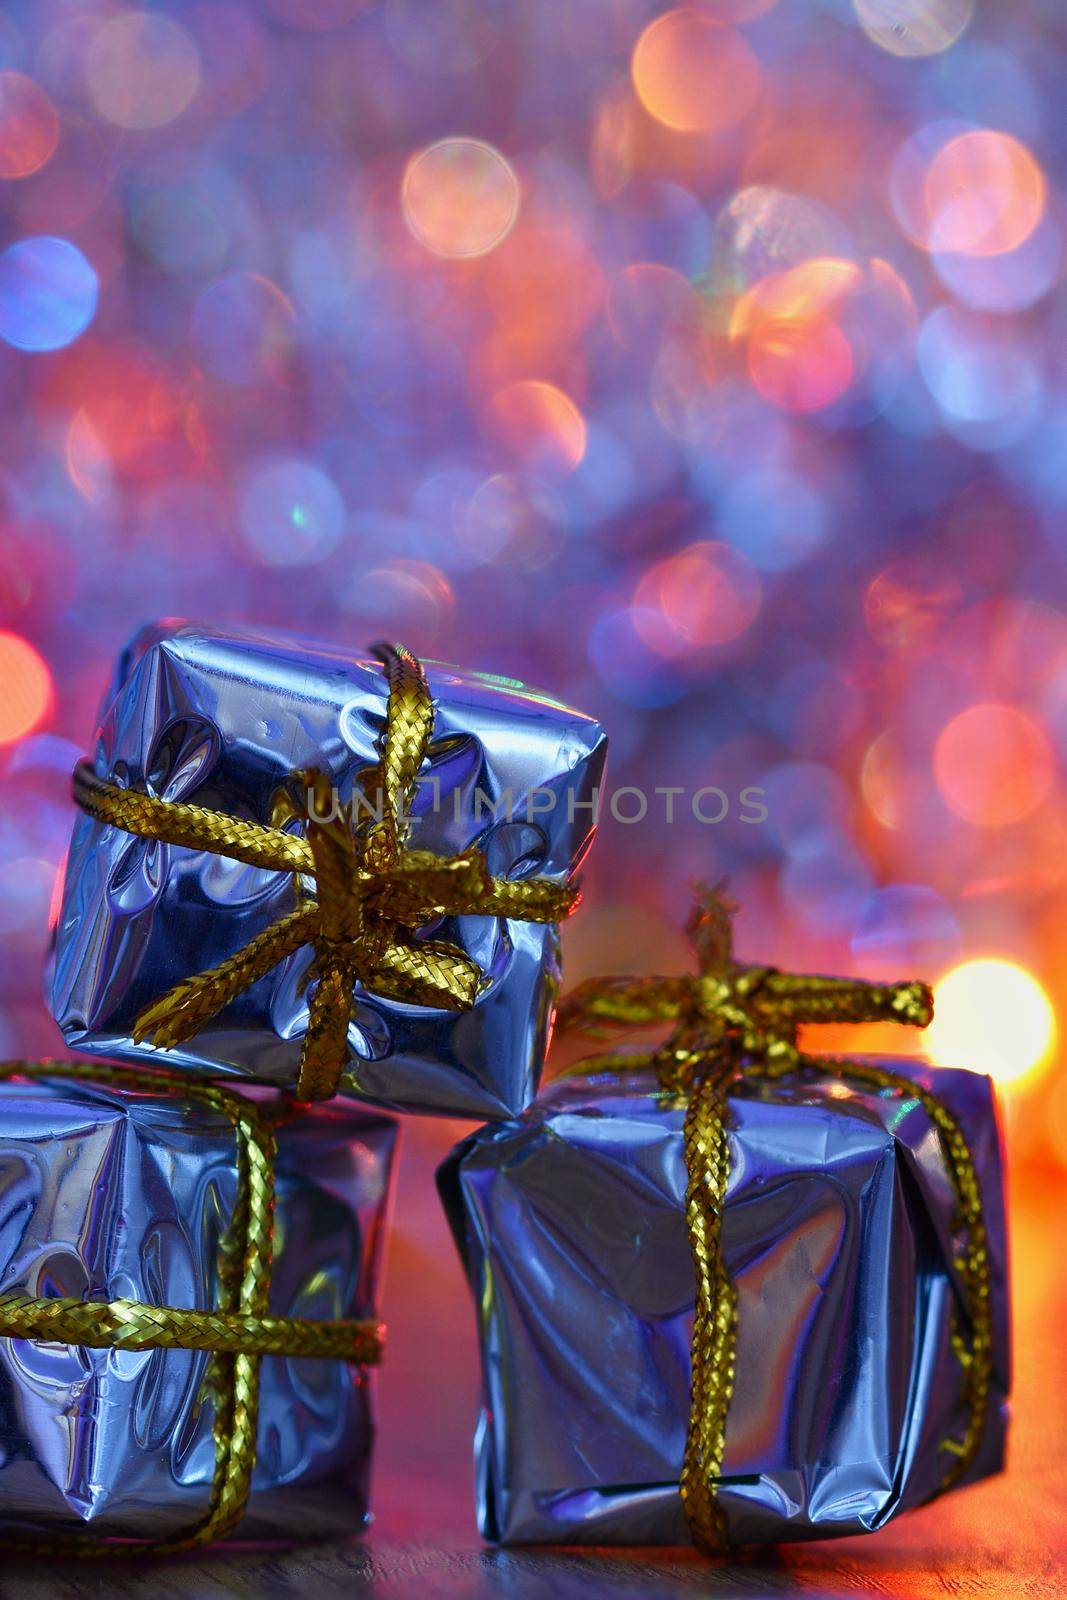 Christmas decorations. Beautiful Christmas tree ornaments on abstract, blurred colorful background. Concept for winter, holiday and snow. by Montypeter